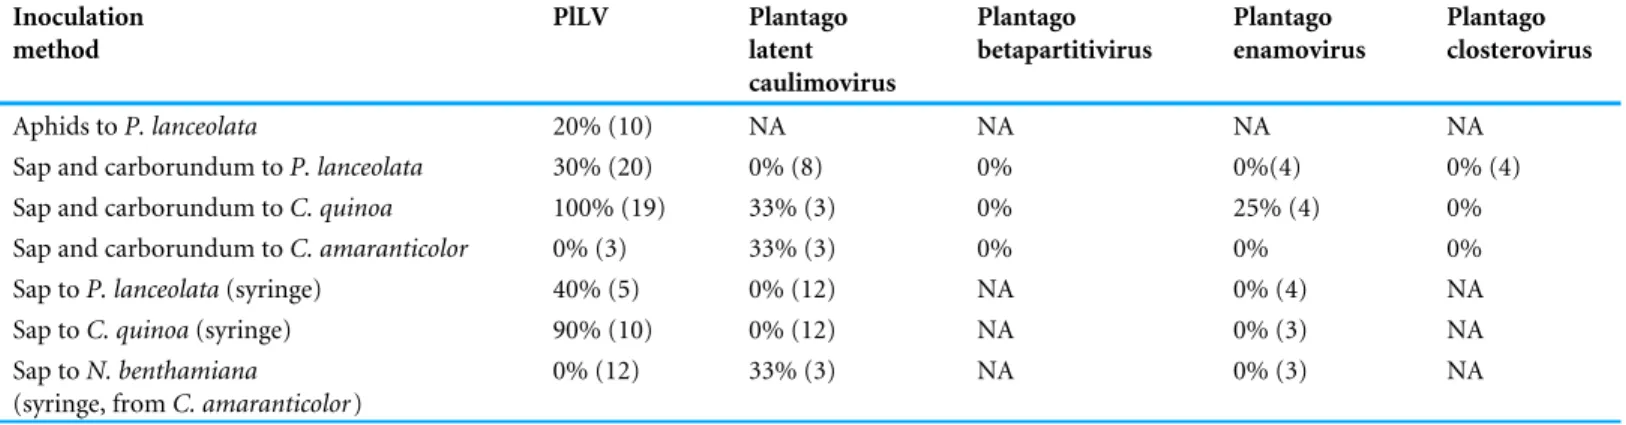 Table 3 Inoculation success of viruses using different methods. The number of inoculations using each method and virus combination is shown in parenthesis